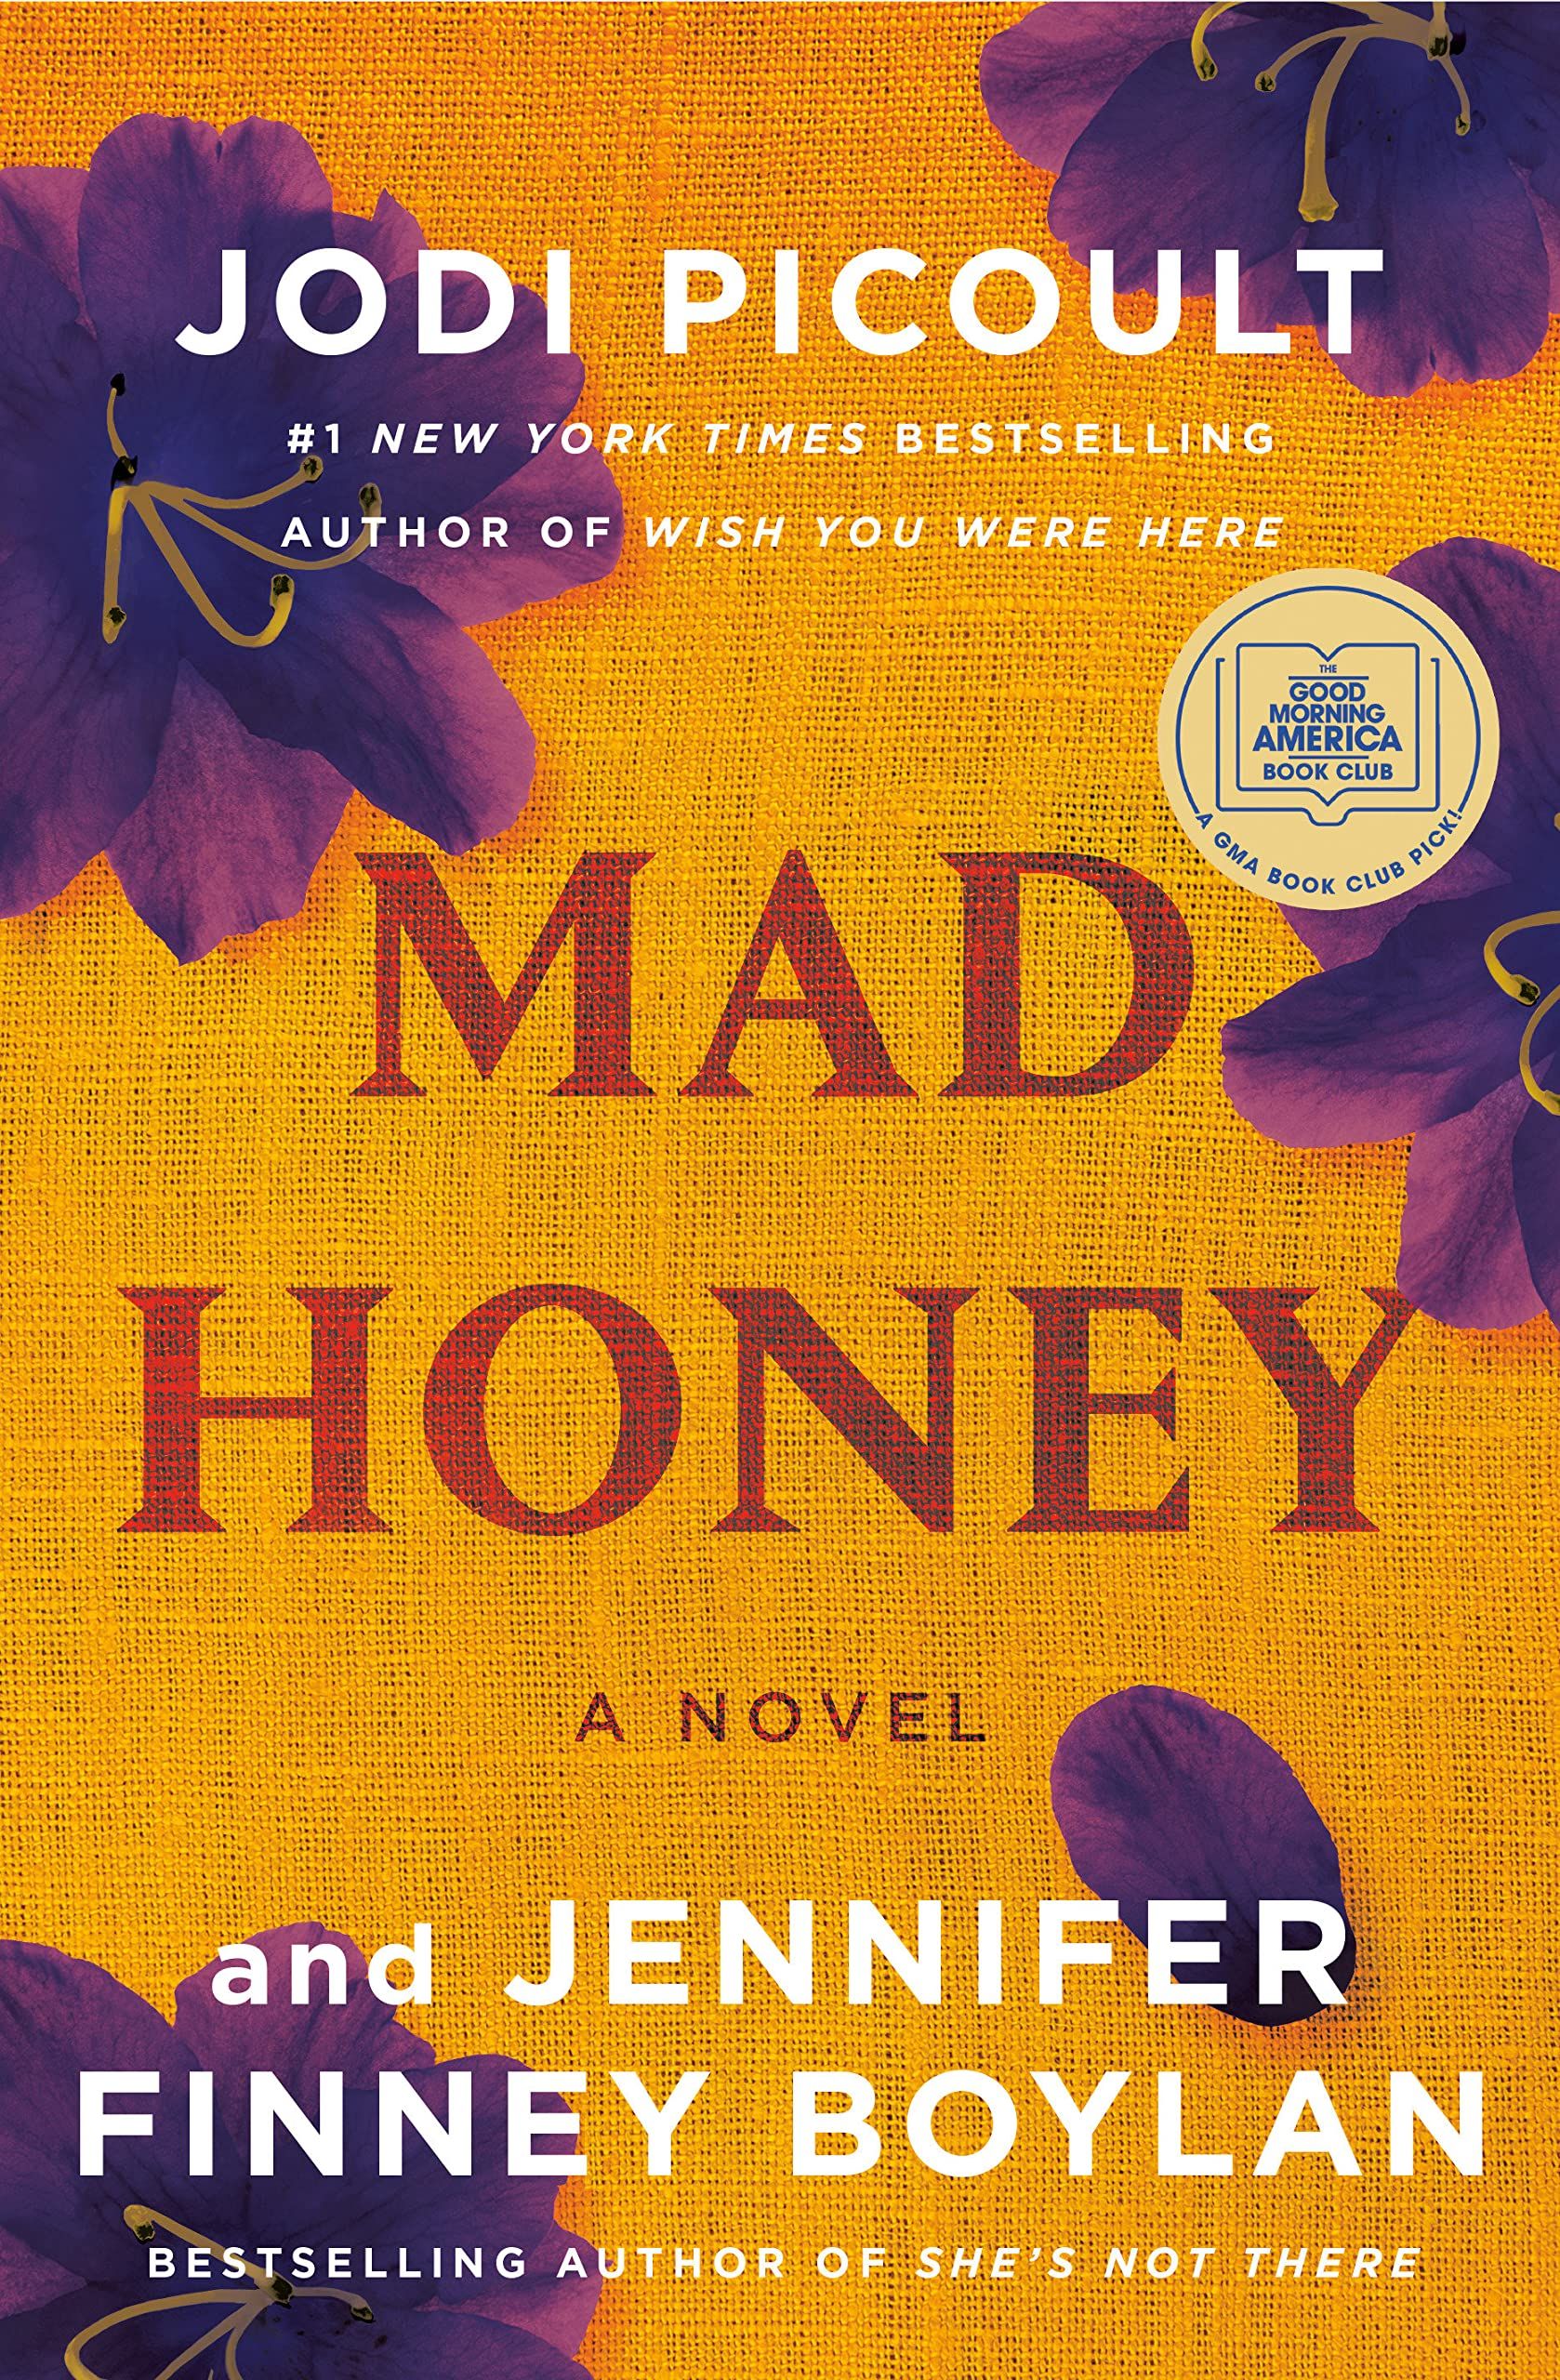 The book cover for Mad Honey by Jodi Picoult and Jennifer Finney Boylan